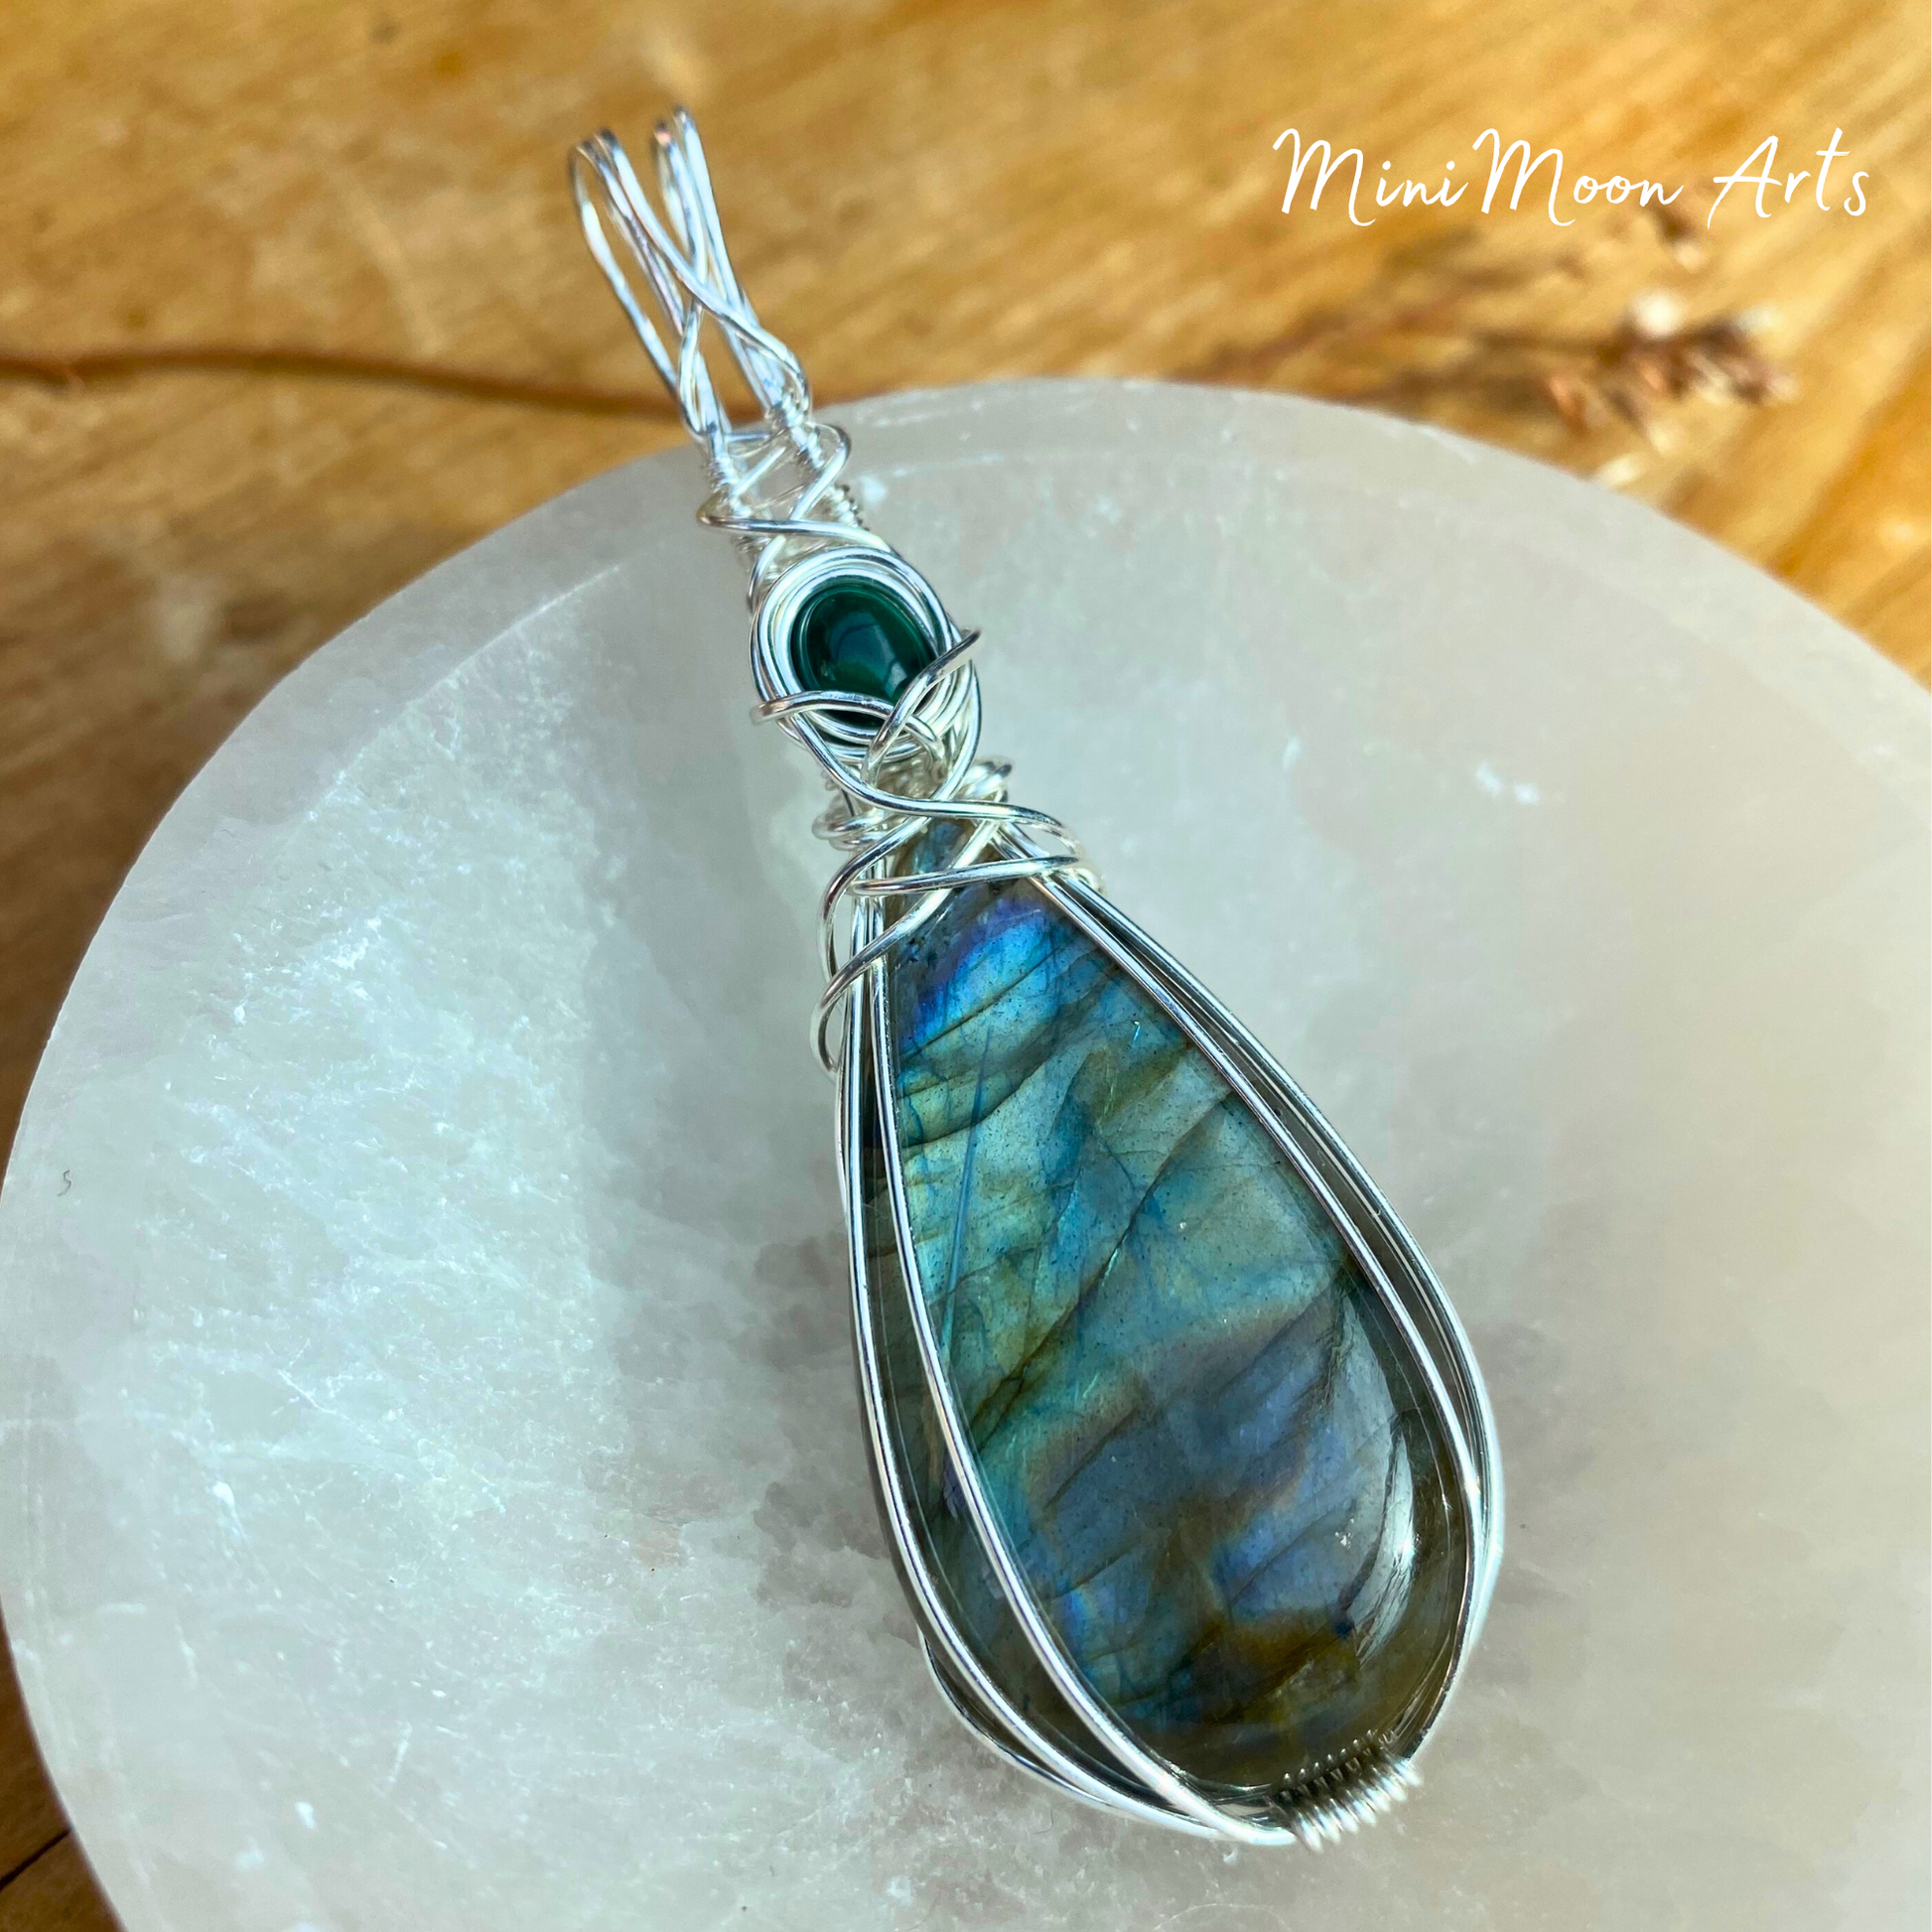 Transform and evolve Labradorite and malachite wire wrapped silver wire pendant sat at a slight angle in a selenite bown and wooden table background